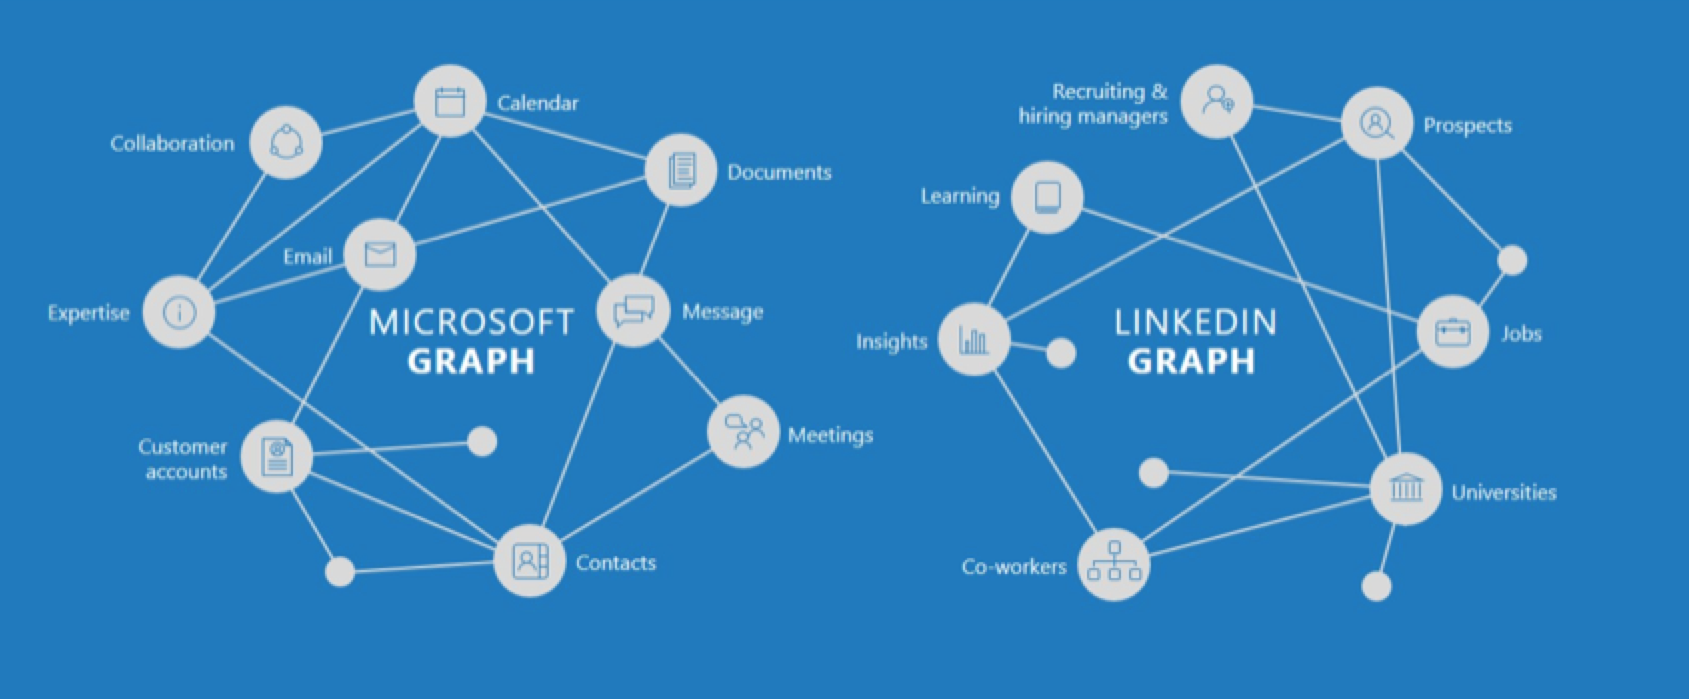 Why Is Microsoft Spending $26 Billion To Acquire LinkedIn?